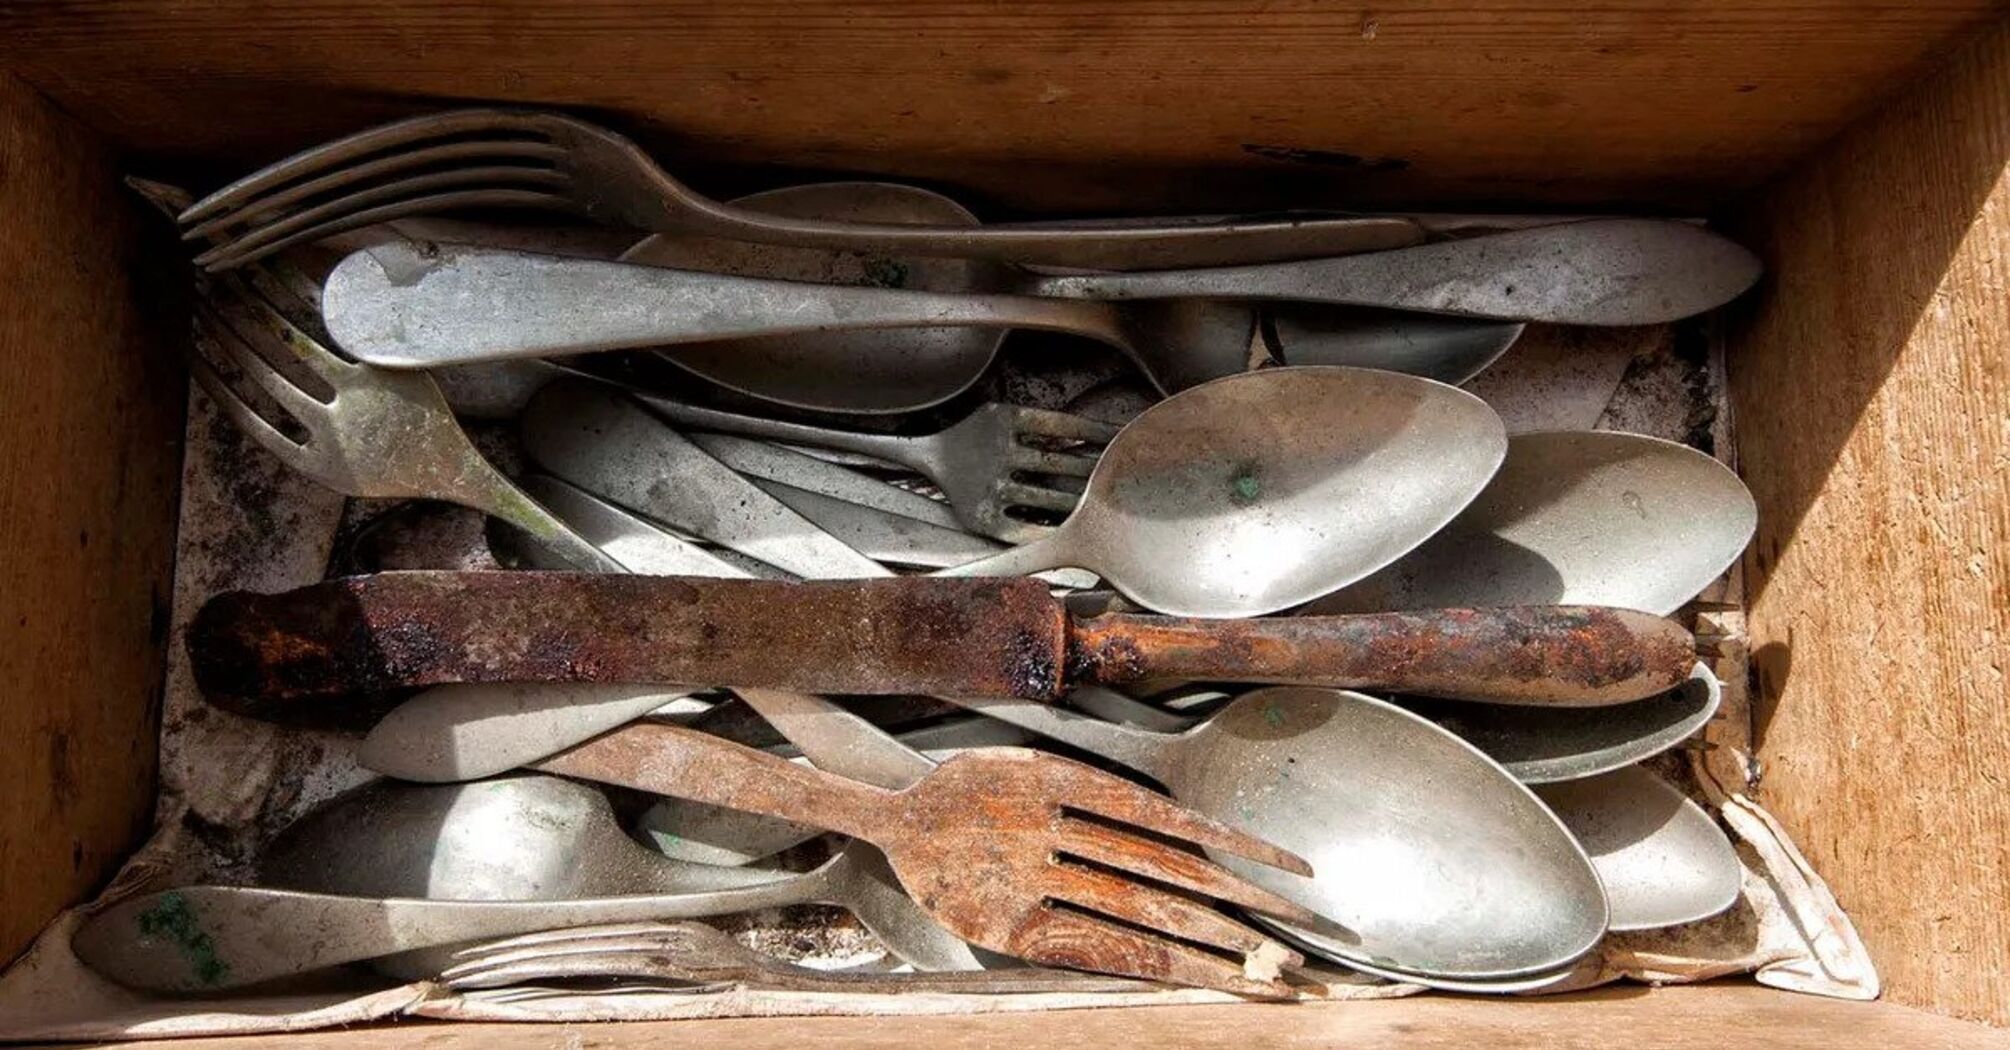 How to remove rust from cutlery